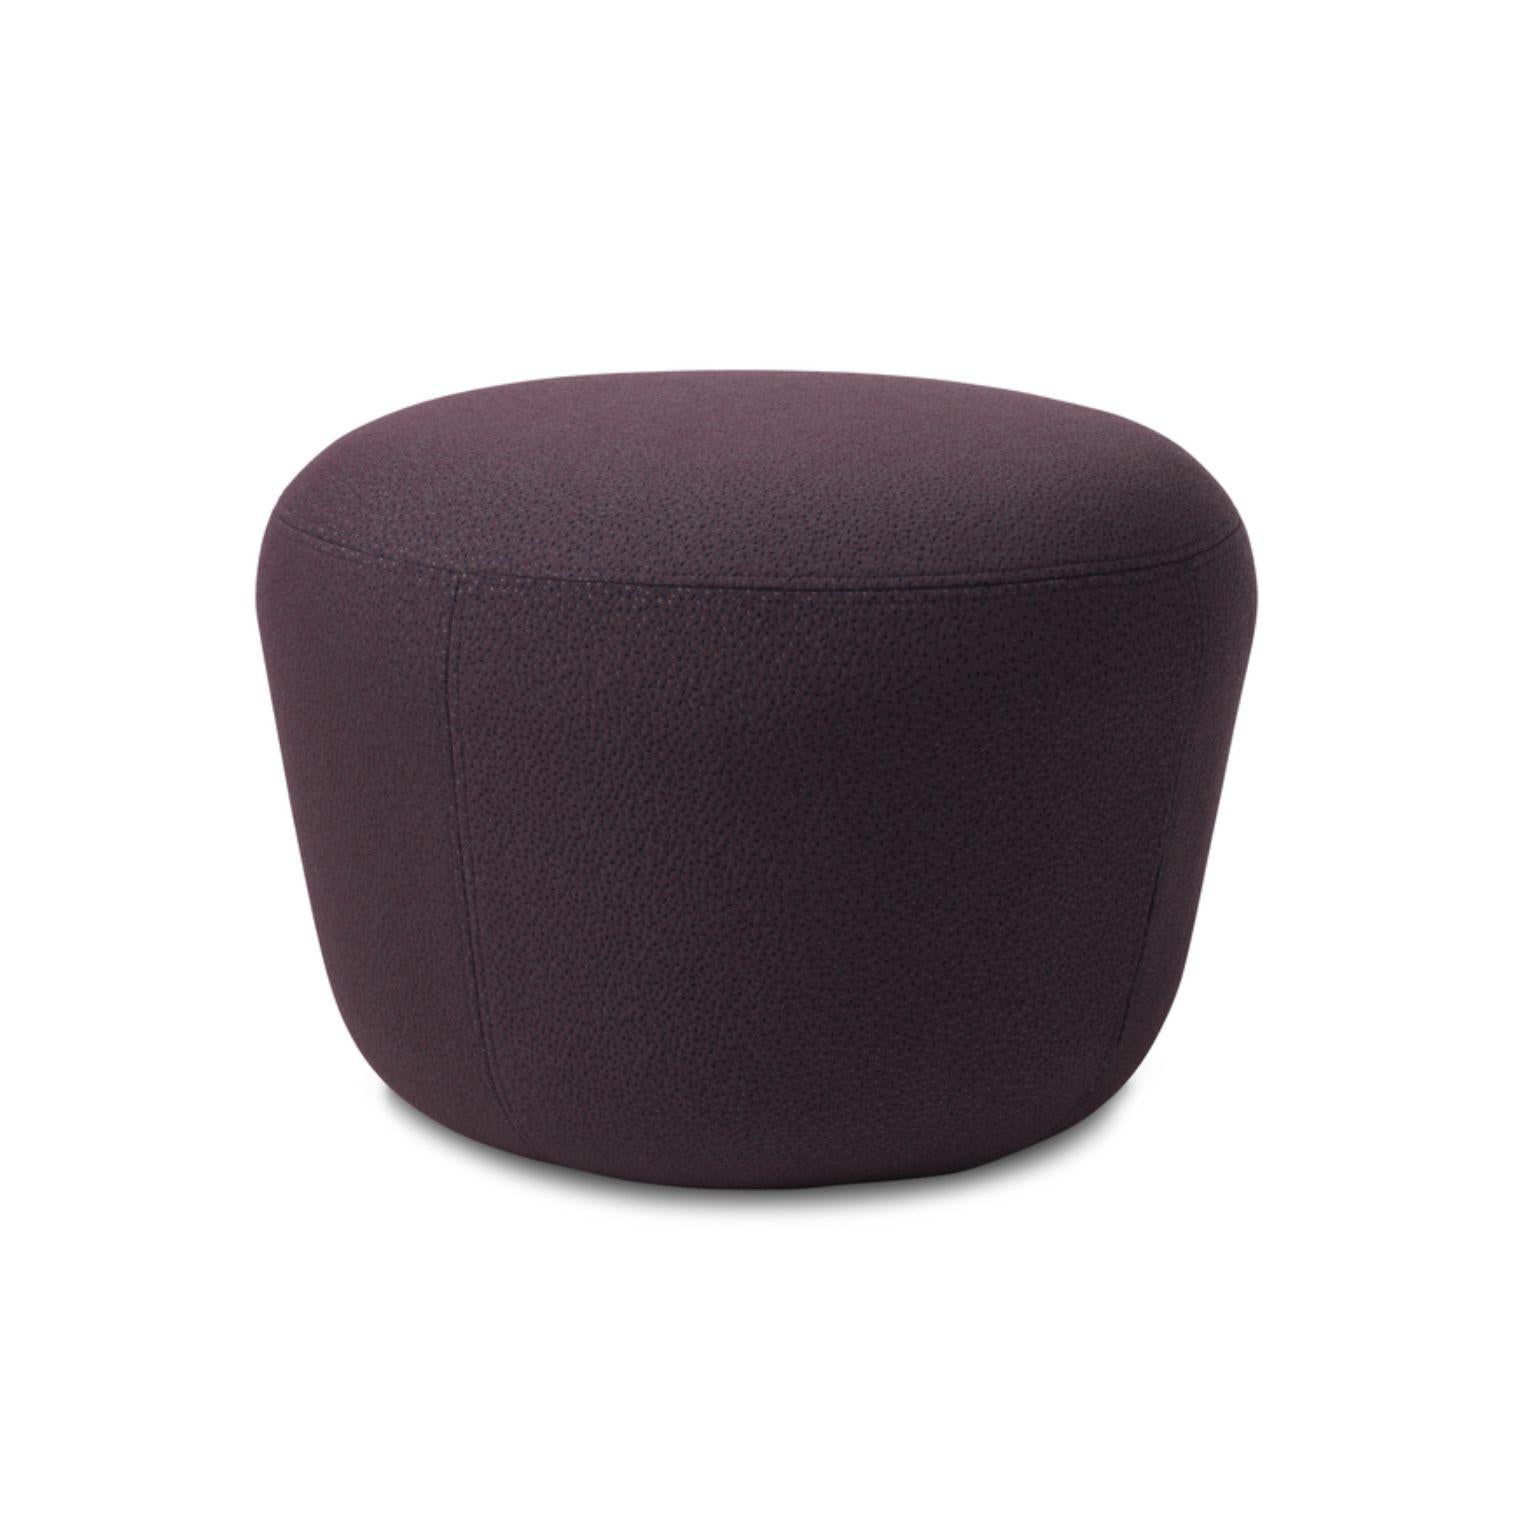 Haven sprinkles eggplant pouf by Warm Nordic
Dimensions: D57 x H 40 cm
Material: textile upholstery, foam, wood.
Weight: 9.5 kg
Also available in different colours and finishes. 

The Haven Pouf is a contemporary pouf with a simple, soft